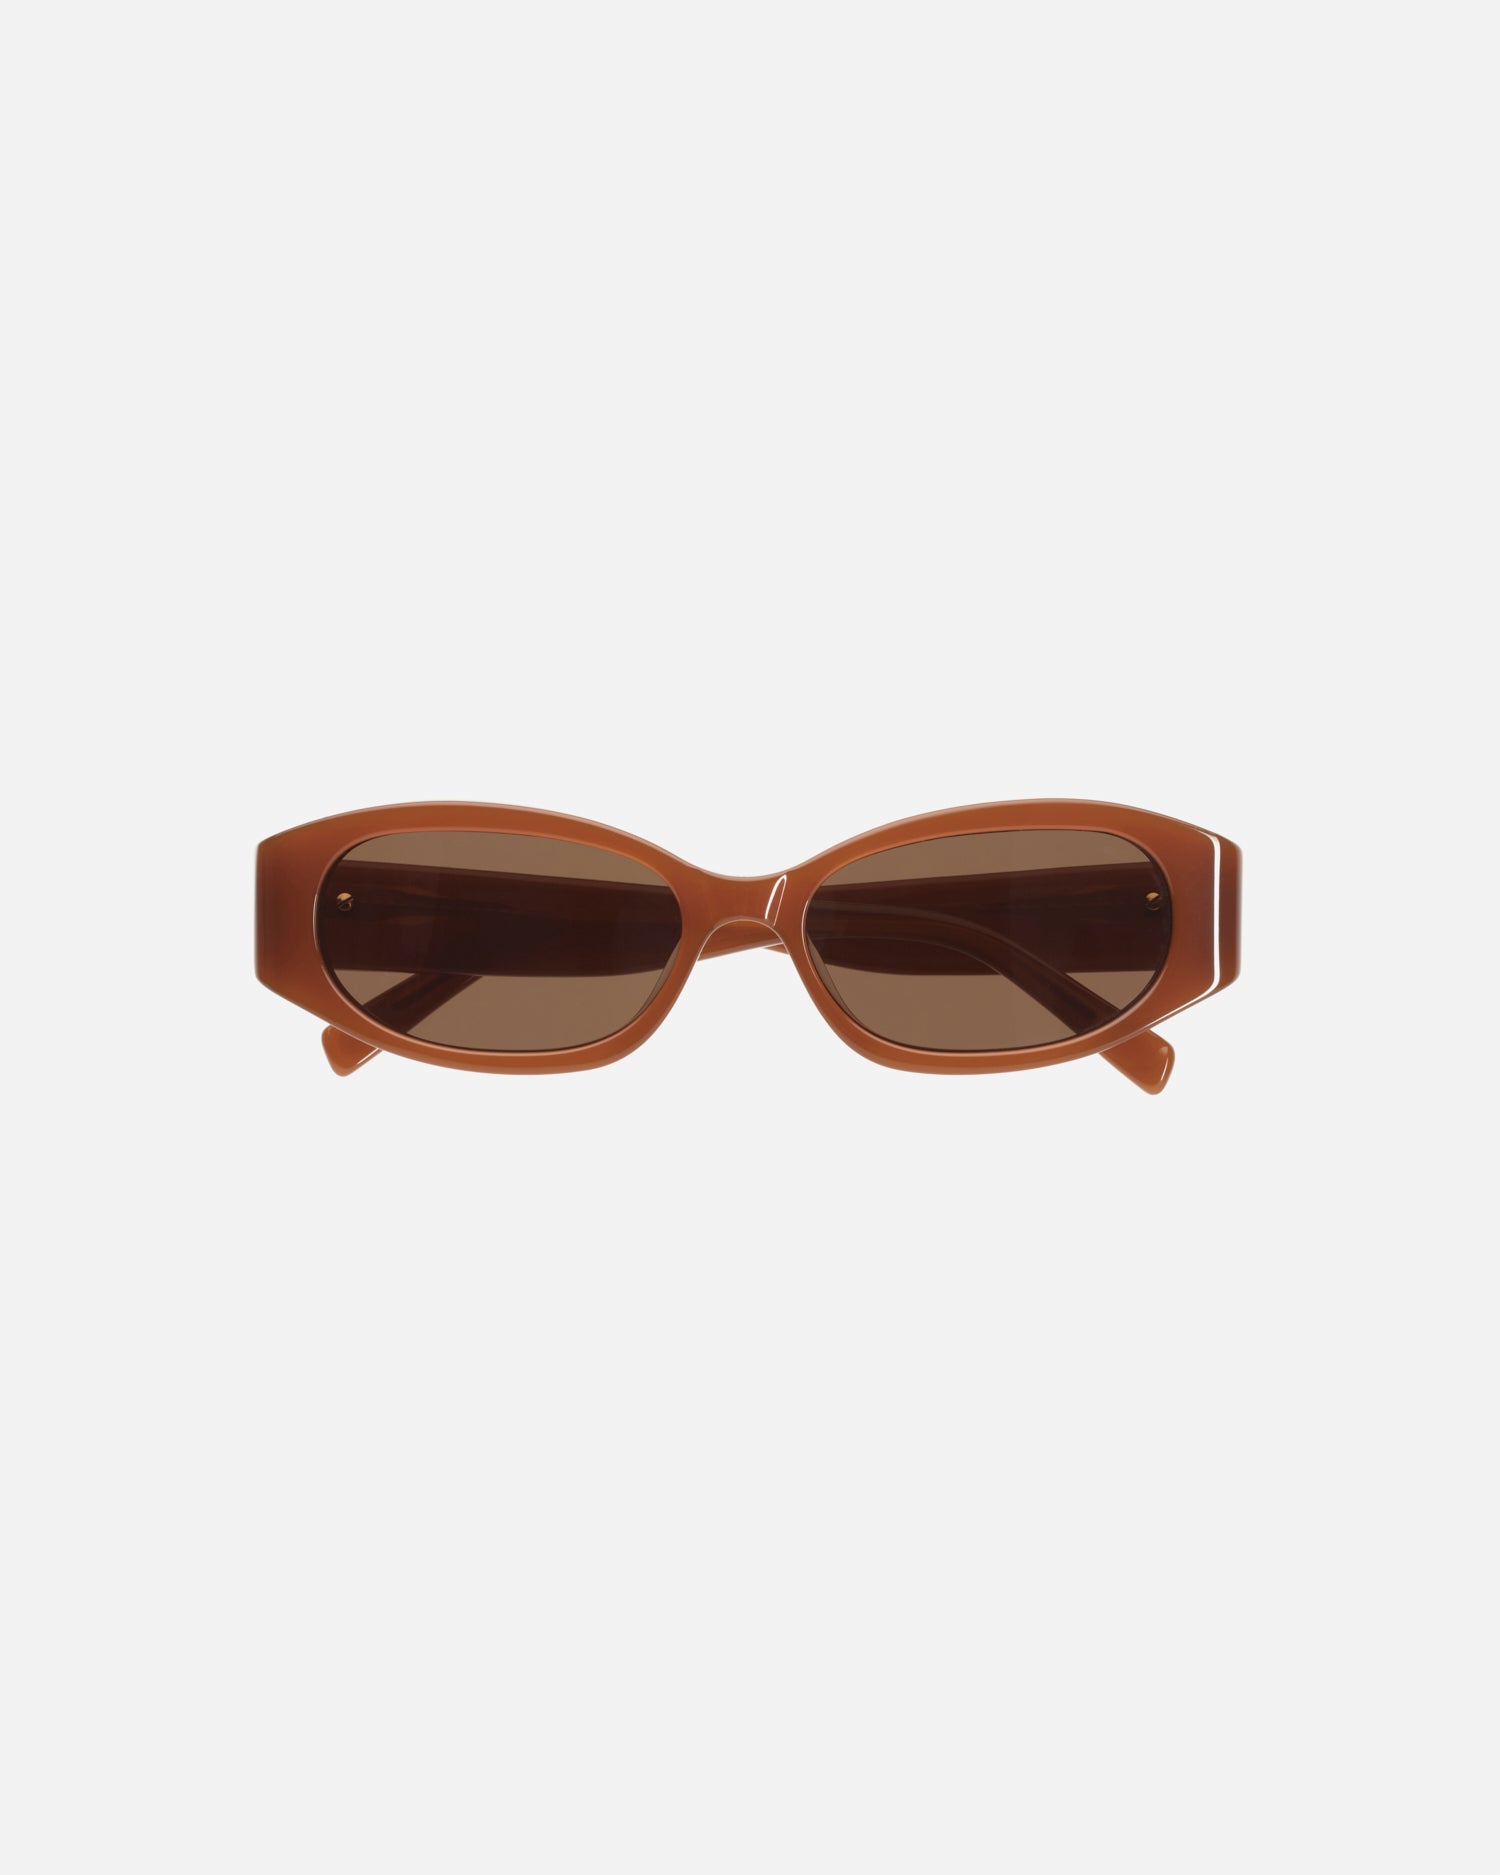 Momentum luxe sunglasses by Velvet Canyon in Chocolate